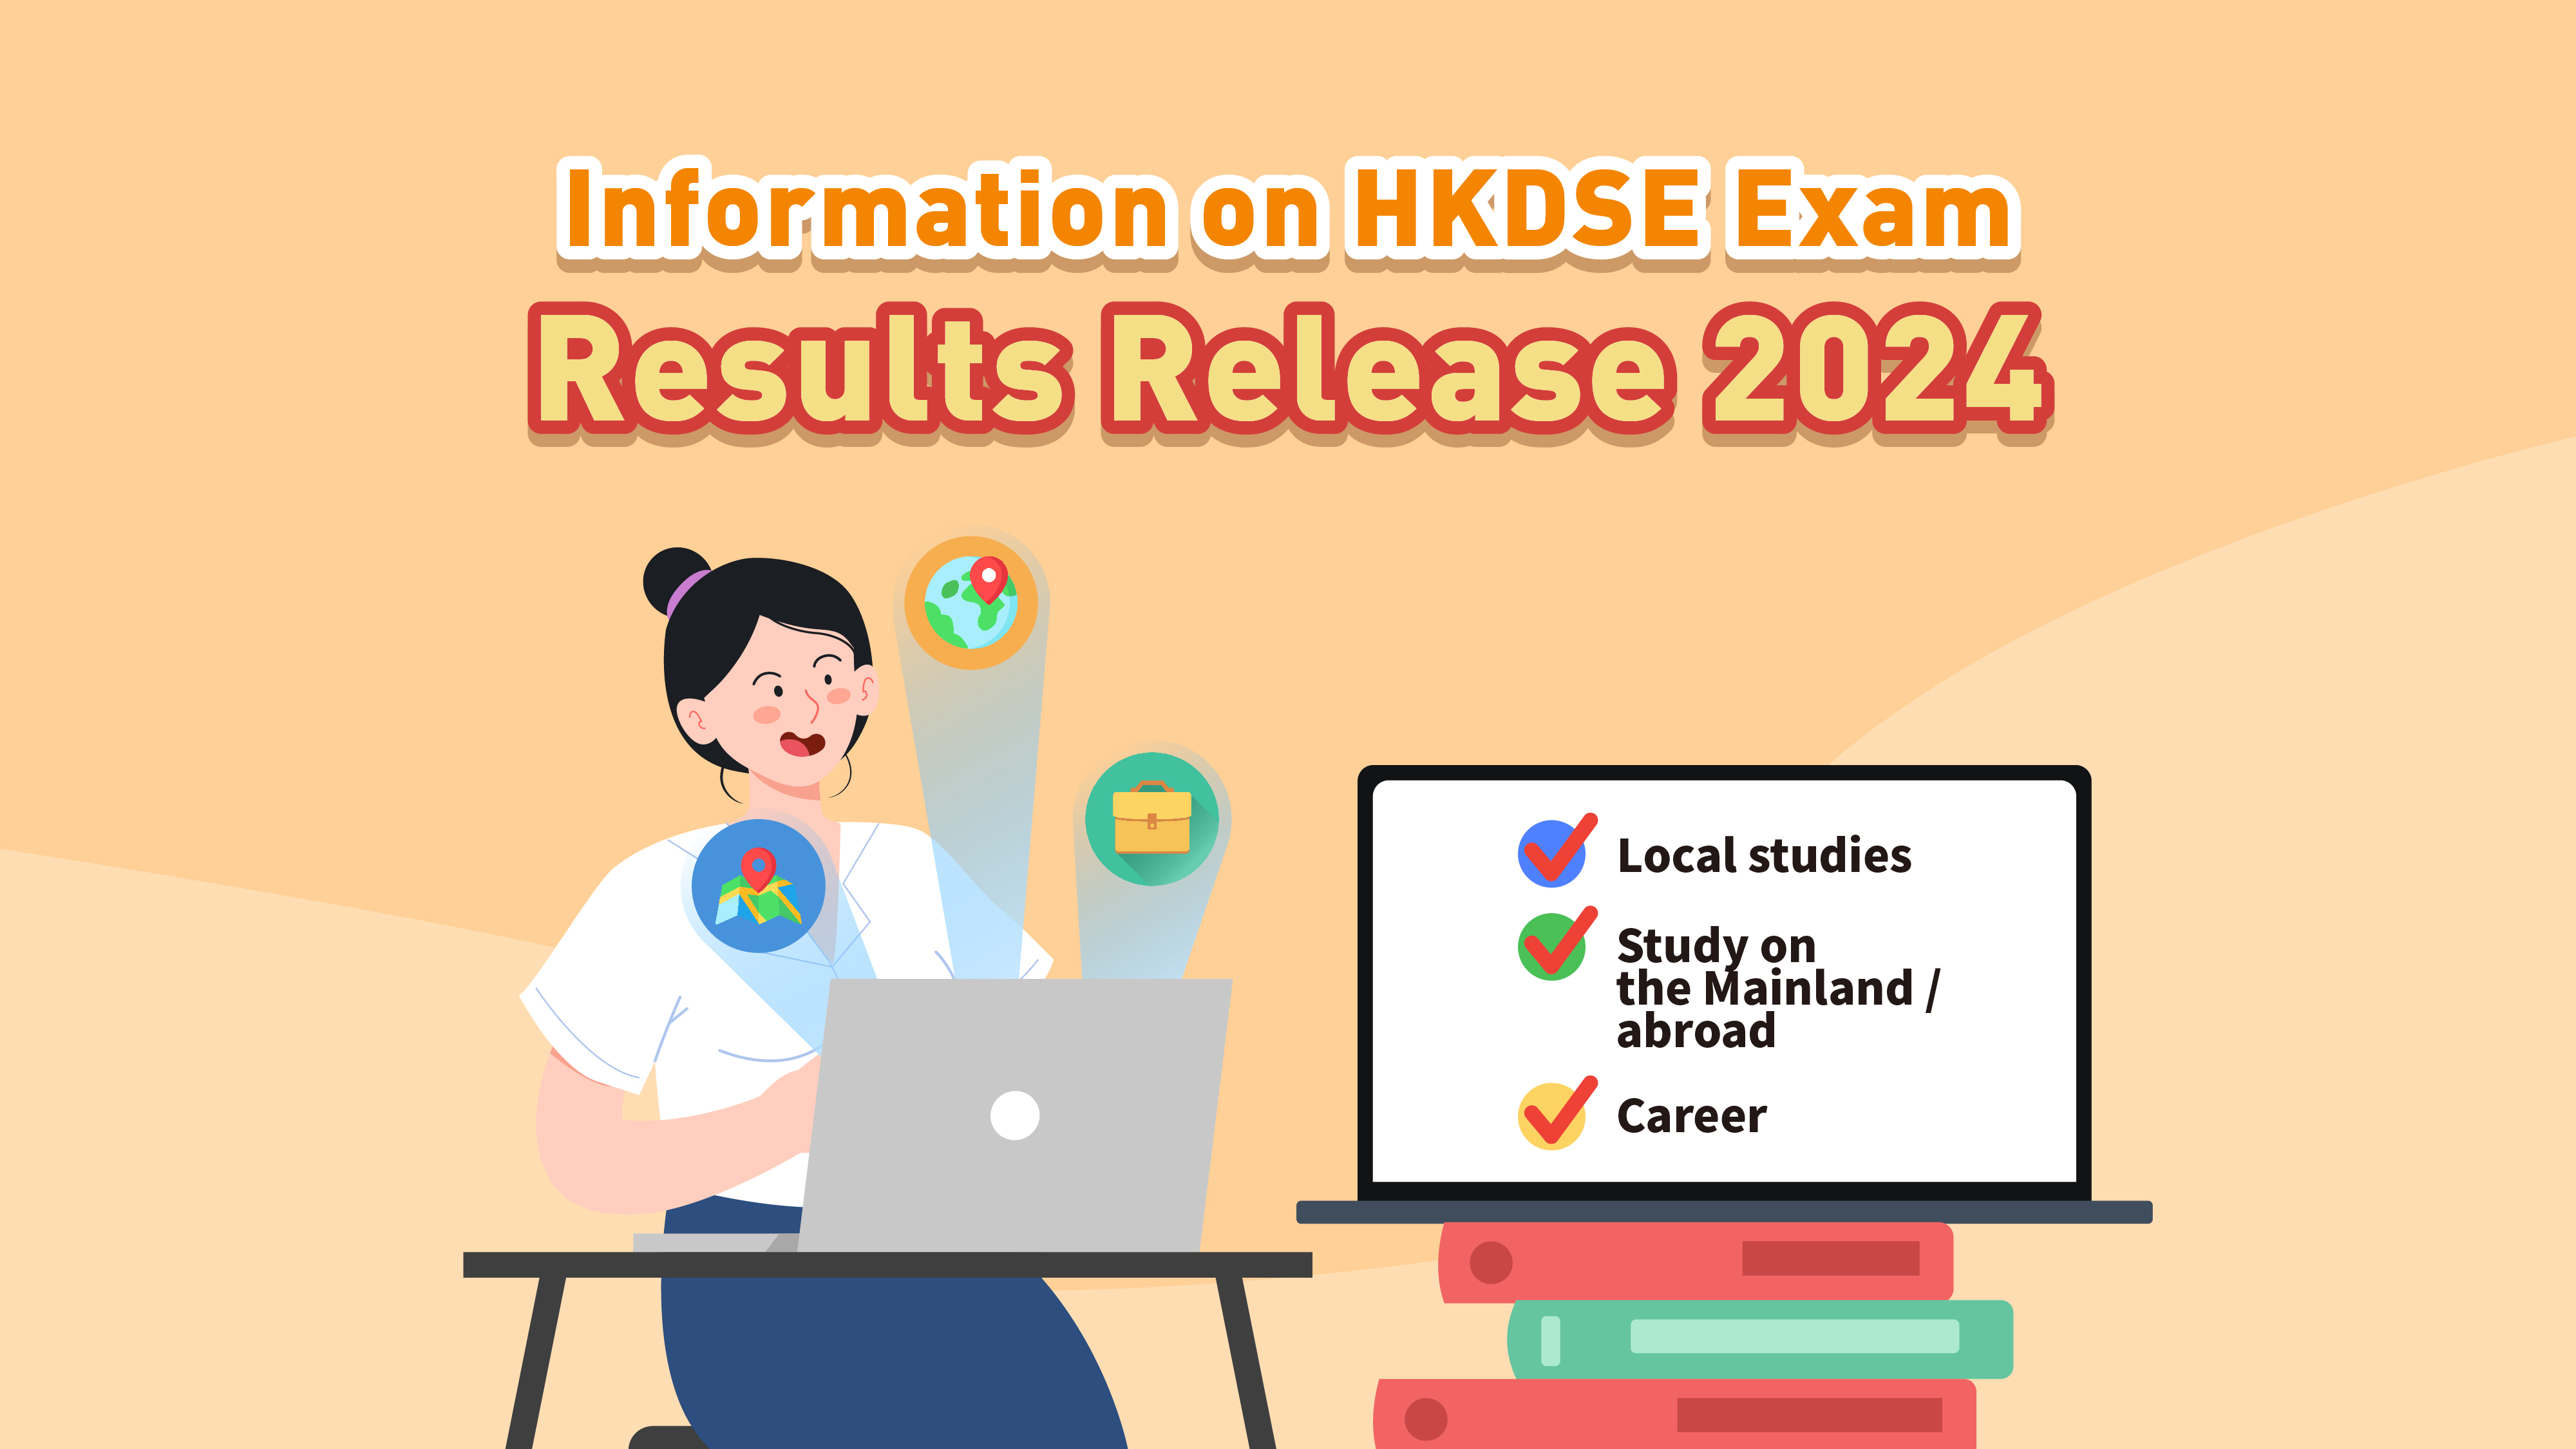 Information on HKDSE Exam Results Release 2023